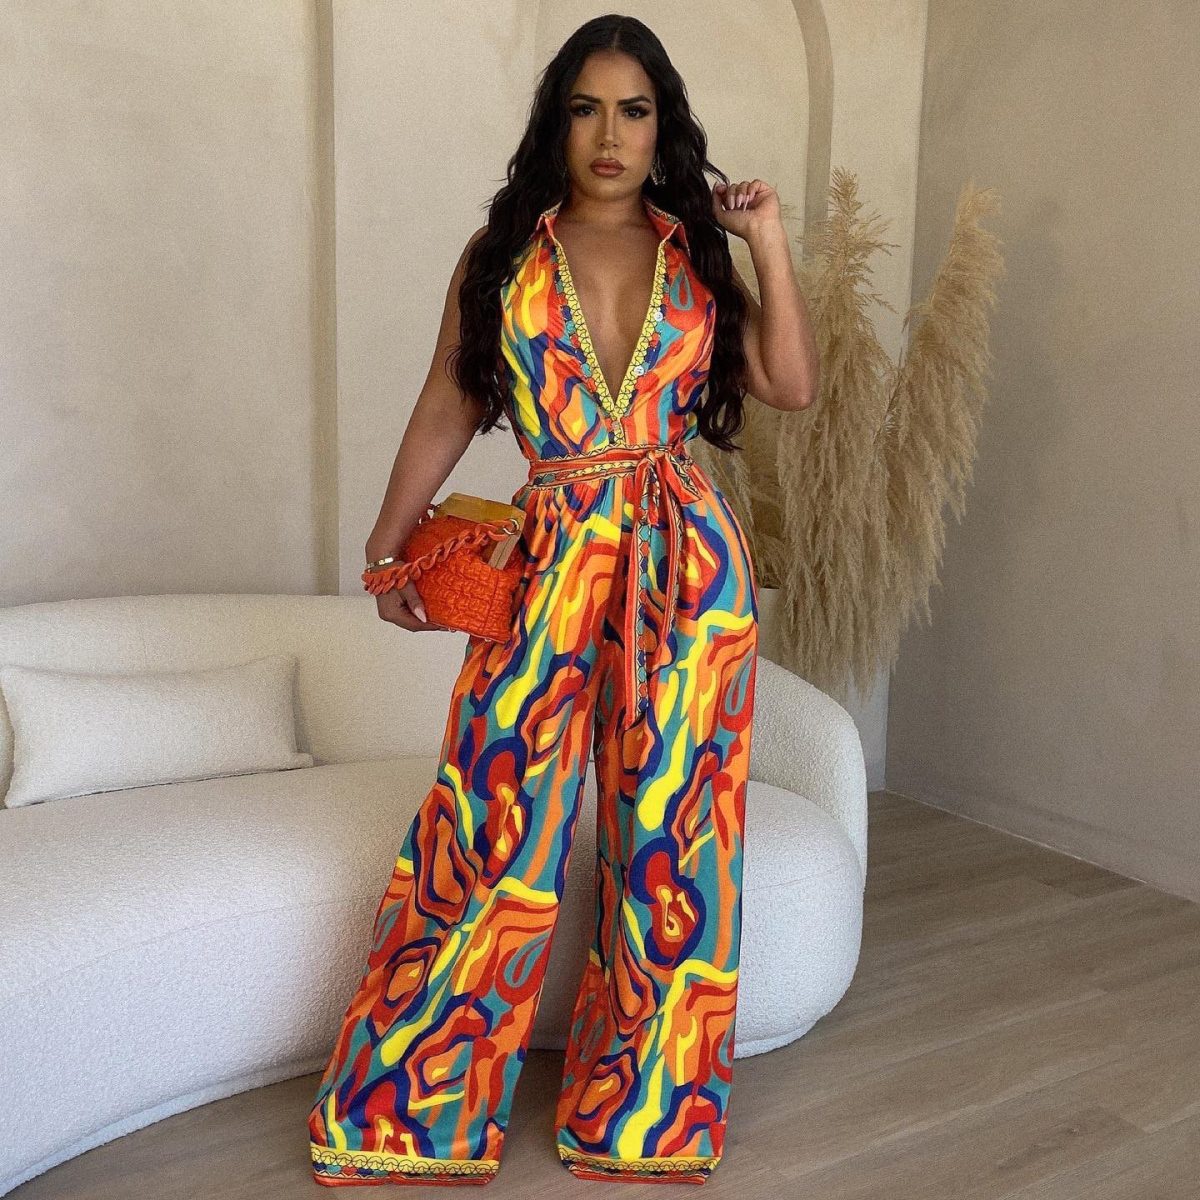 Ethnic Sleeveless Positioning Printed Wide Leg Jumpsuit in Jumpsuits & Rompers